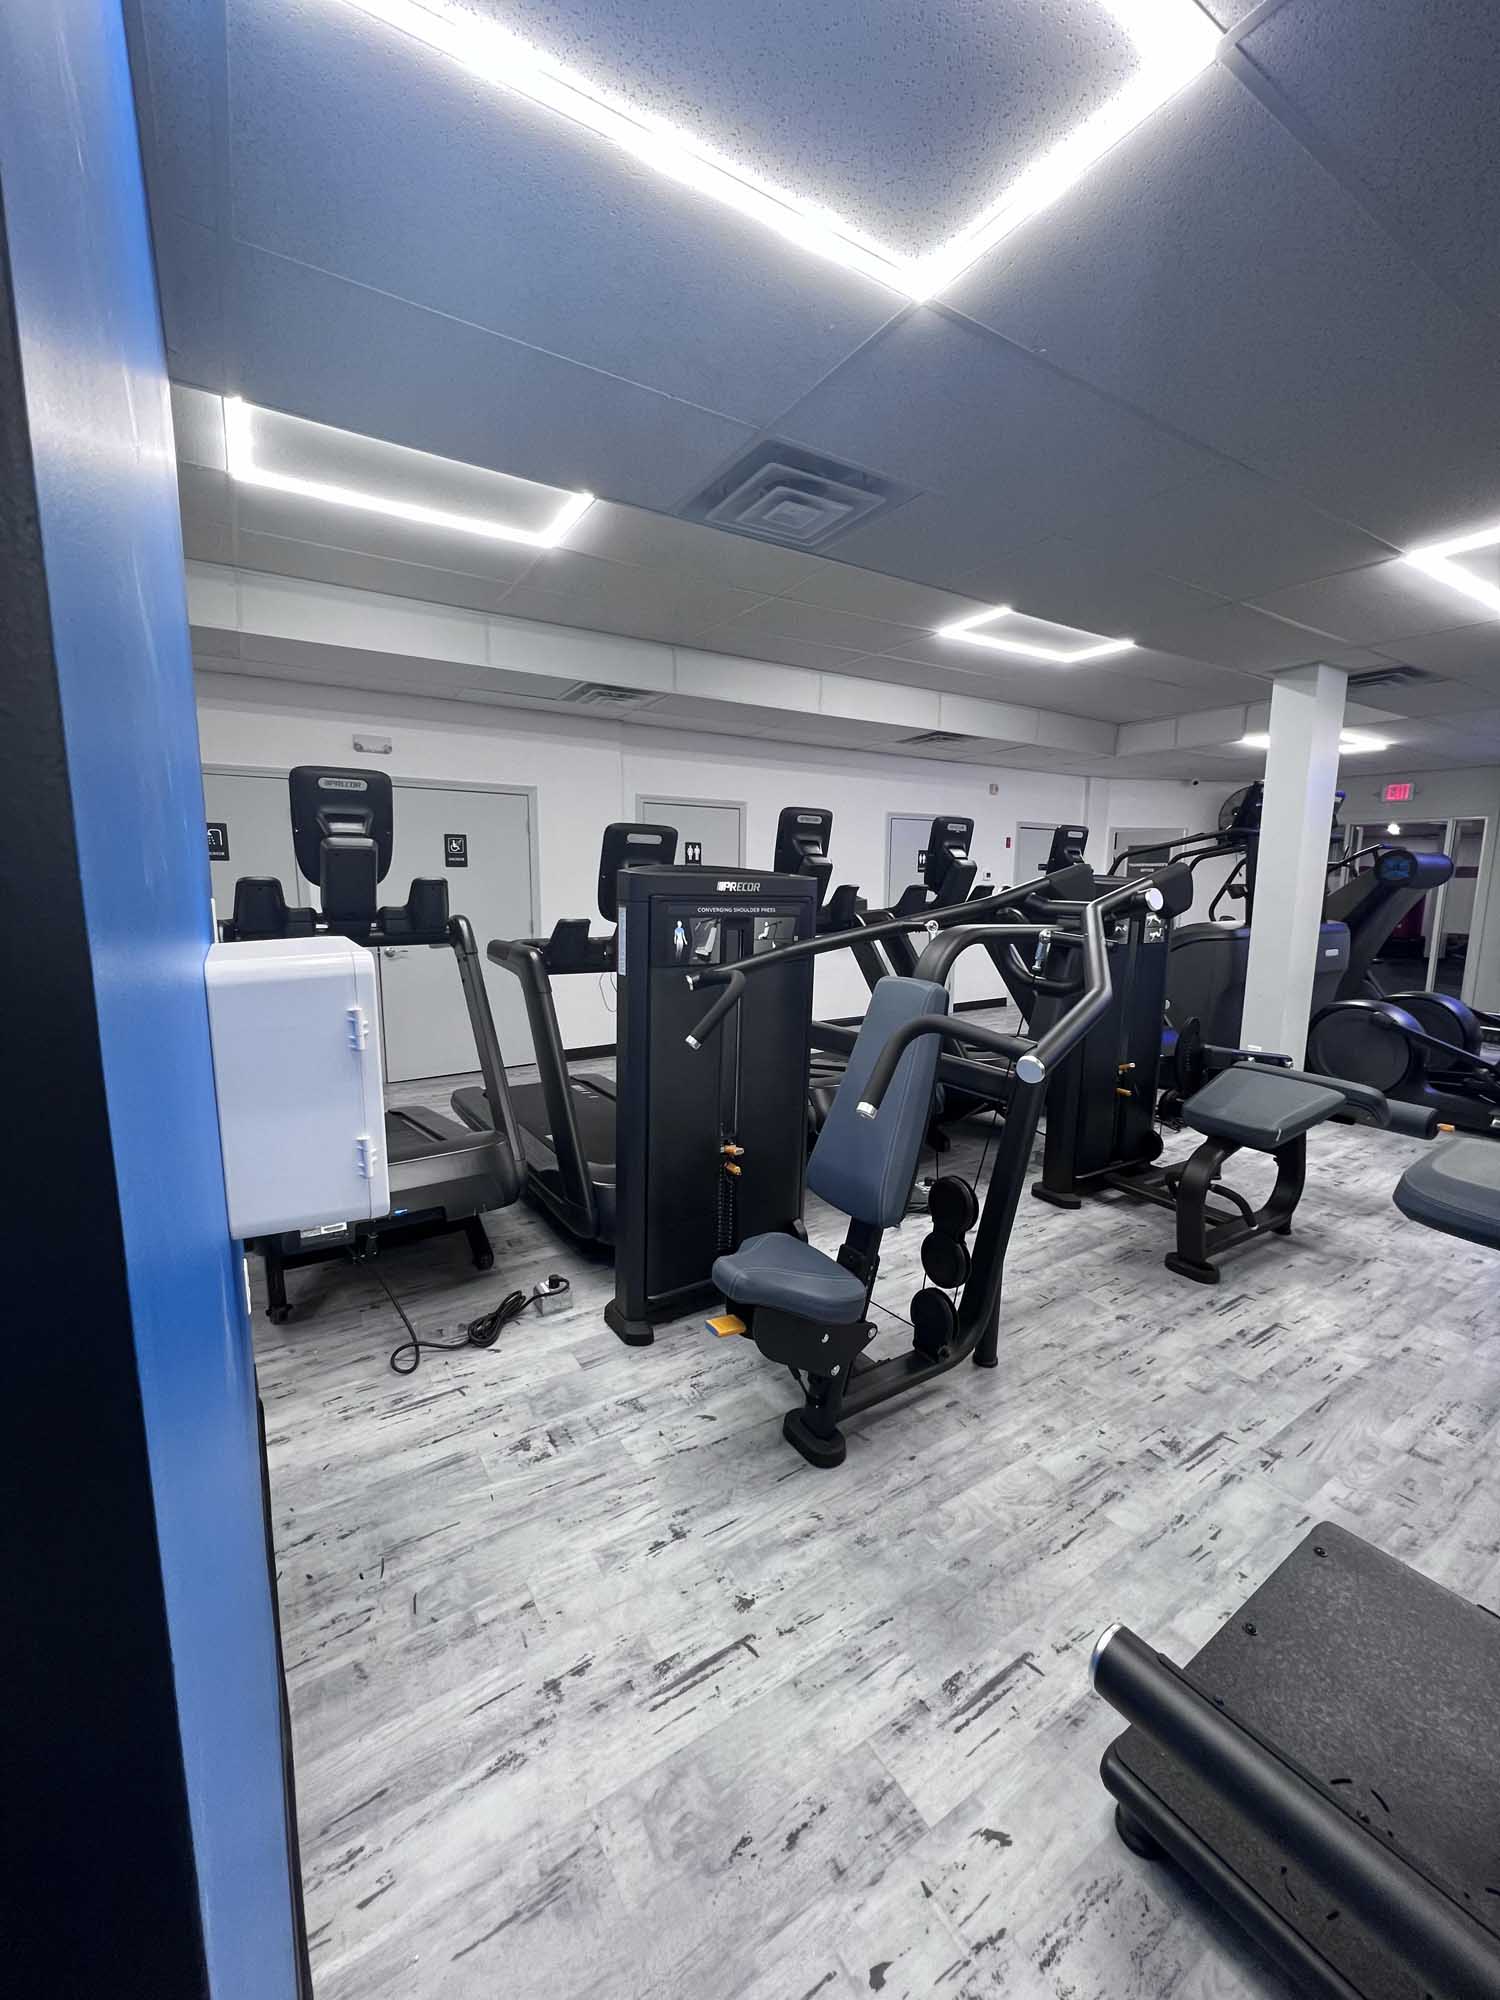 capital-fitness-24-hr-gym-concord-nh (1)